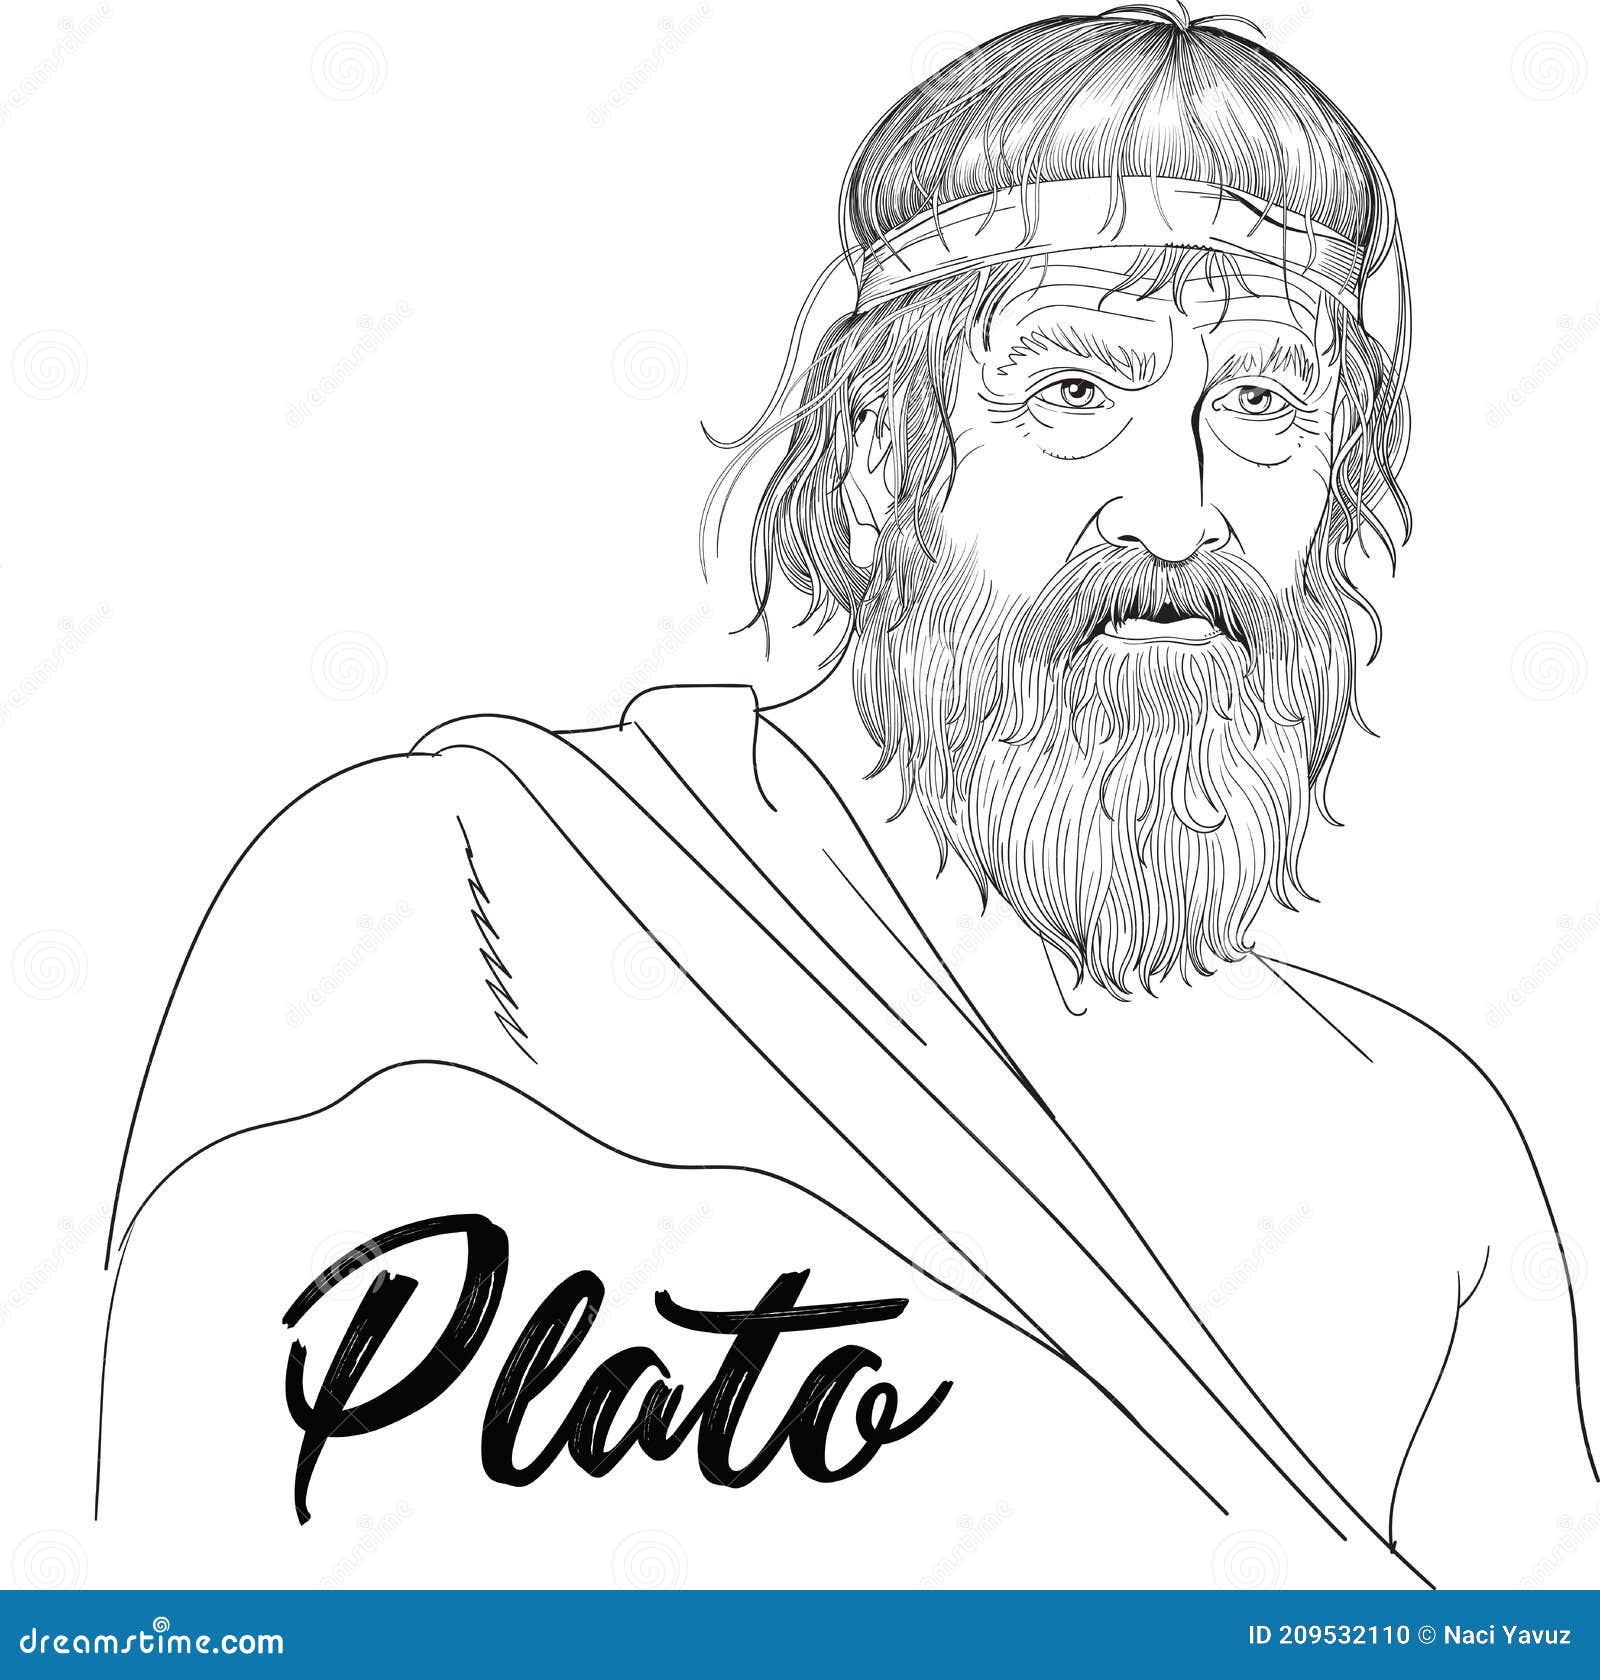 The Ancient Greek Philosopher Plato: His Life and Works - Owlcation